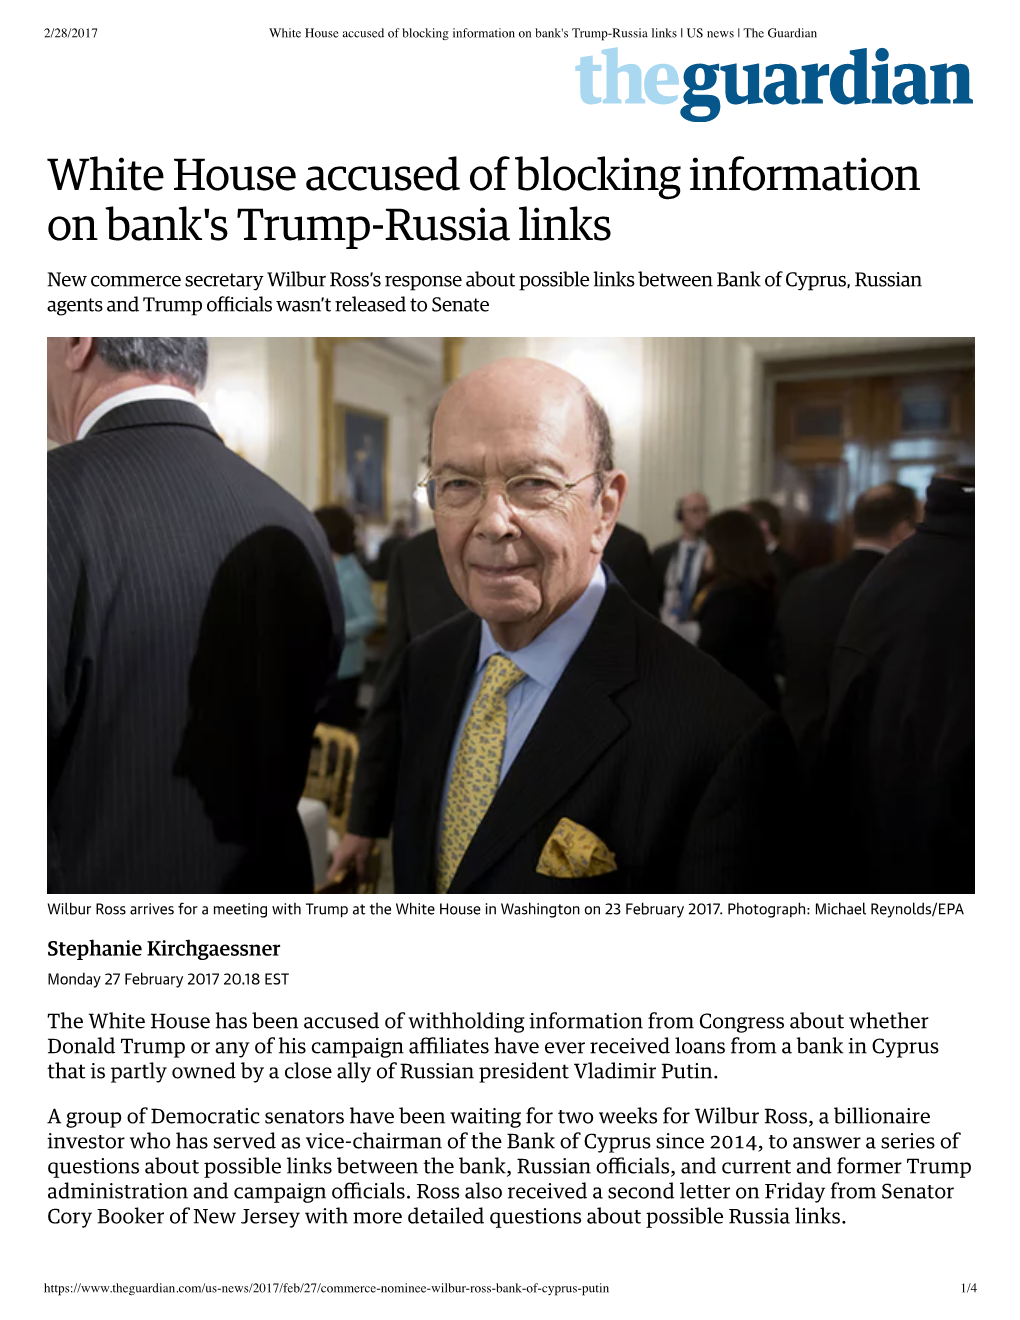 White House Accused of Blocking Information on Bank's Trump-Russia Links | US News | the Guardian